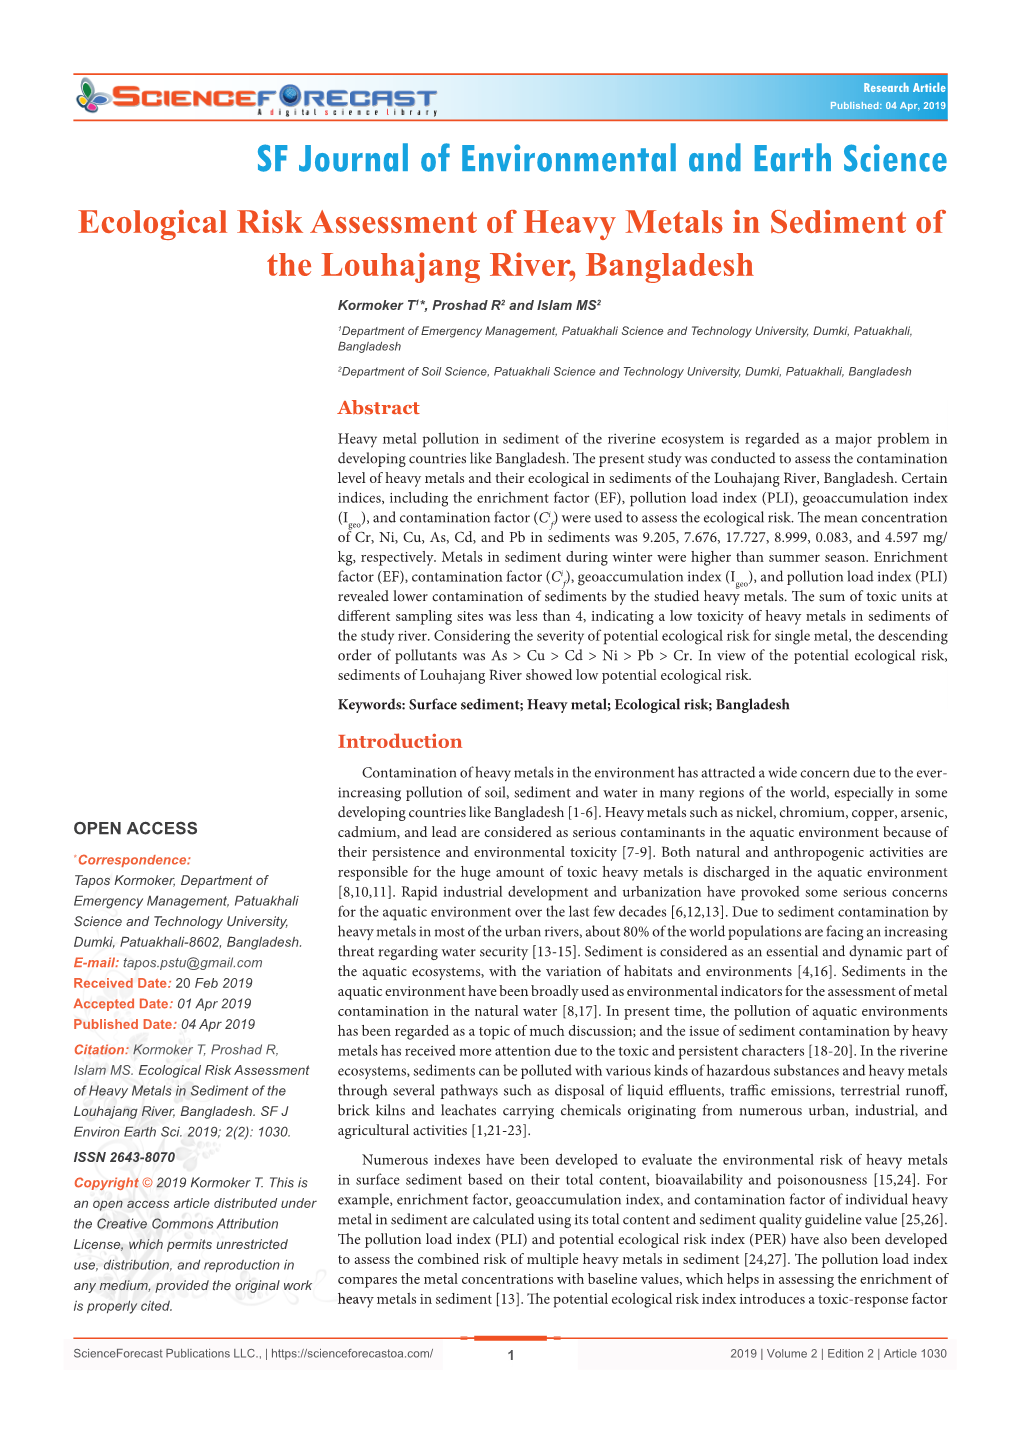 Ecological Risk Assessment of Heavy Metals in Sediment of the Louhajang River, Bangladesh